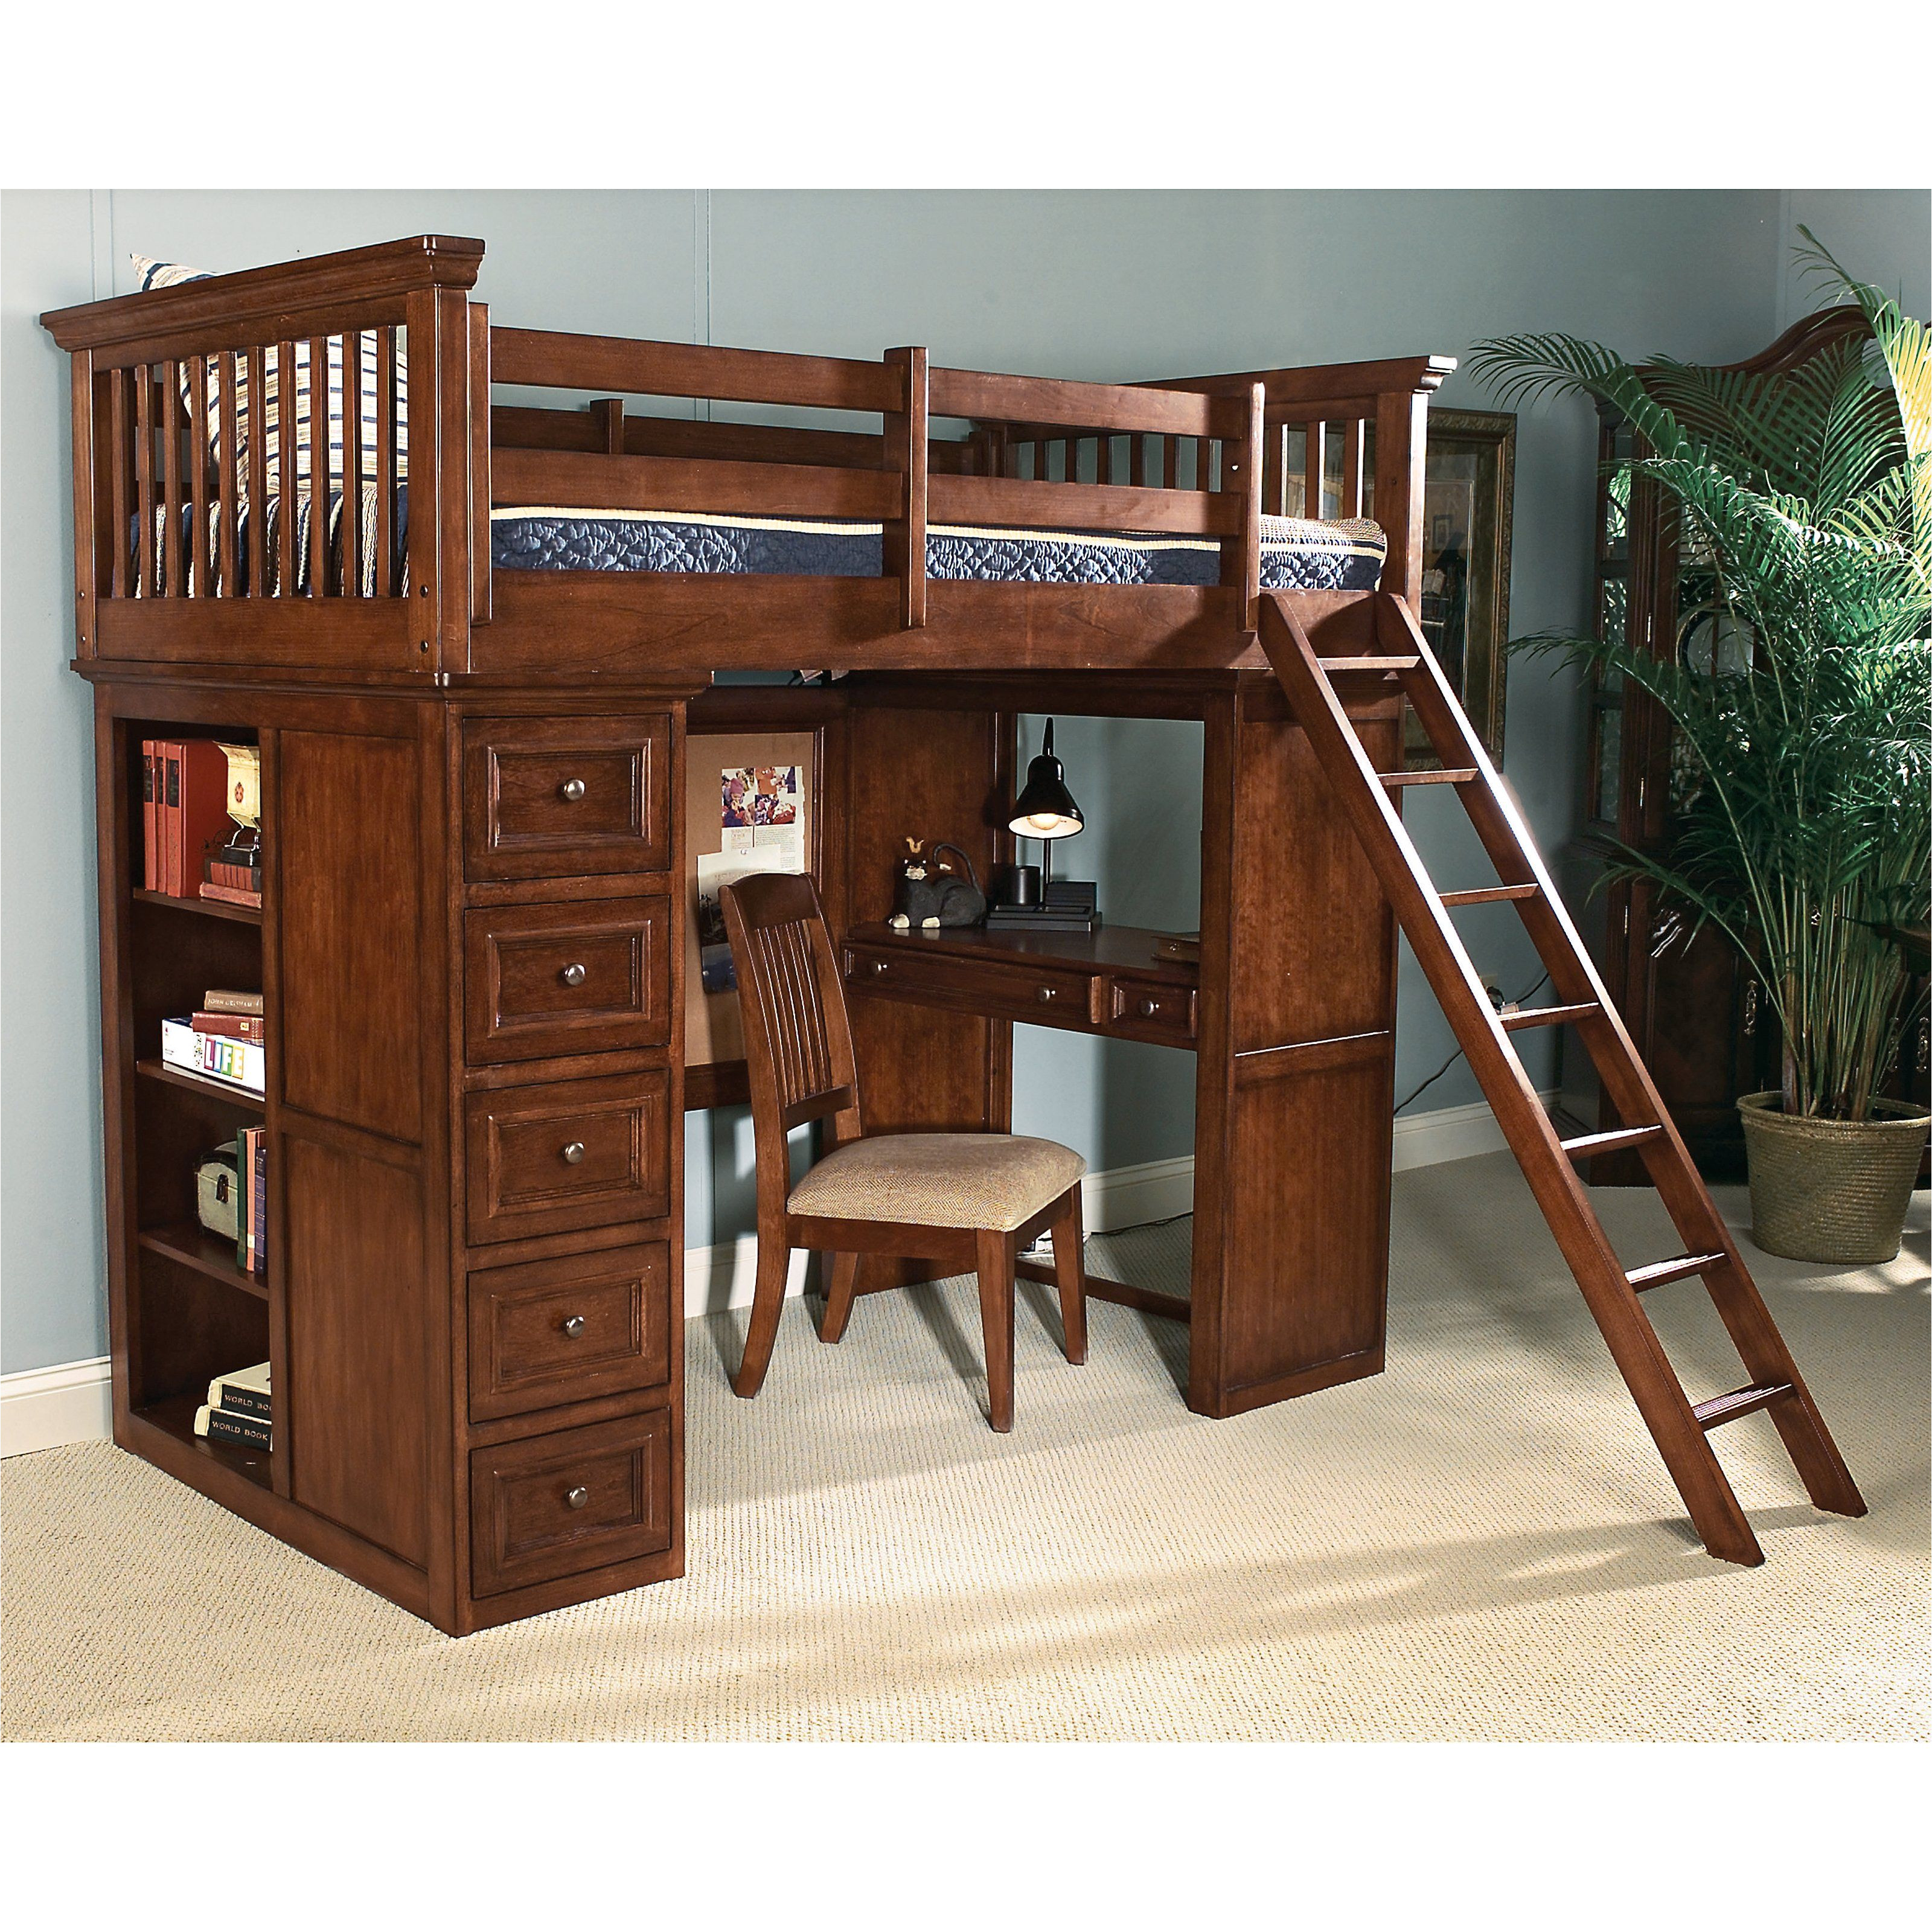 american spirit jr twin loft bed i want to get this for jeremiah when he gets older